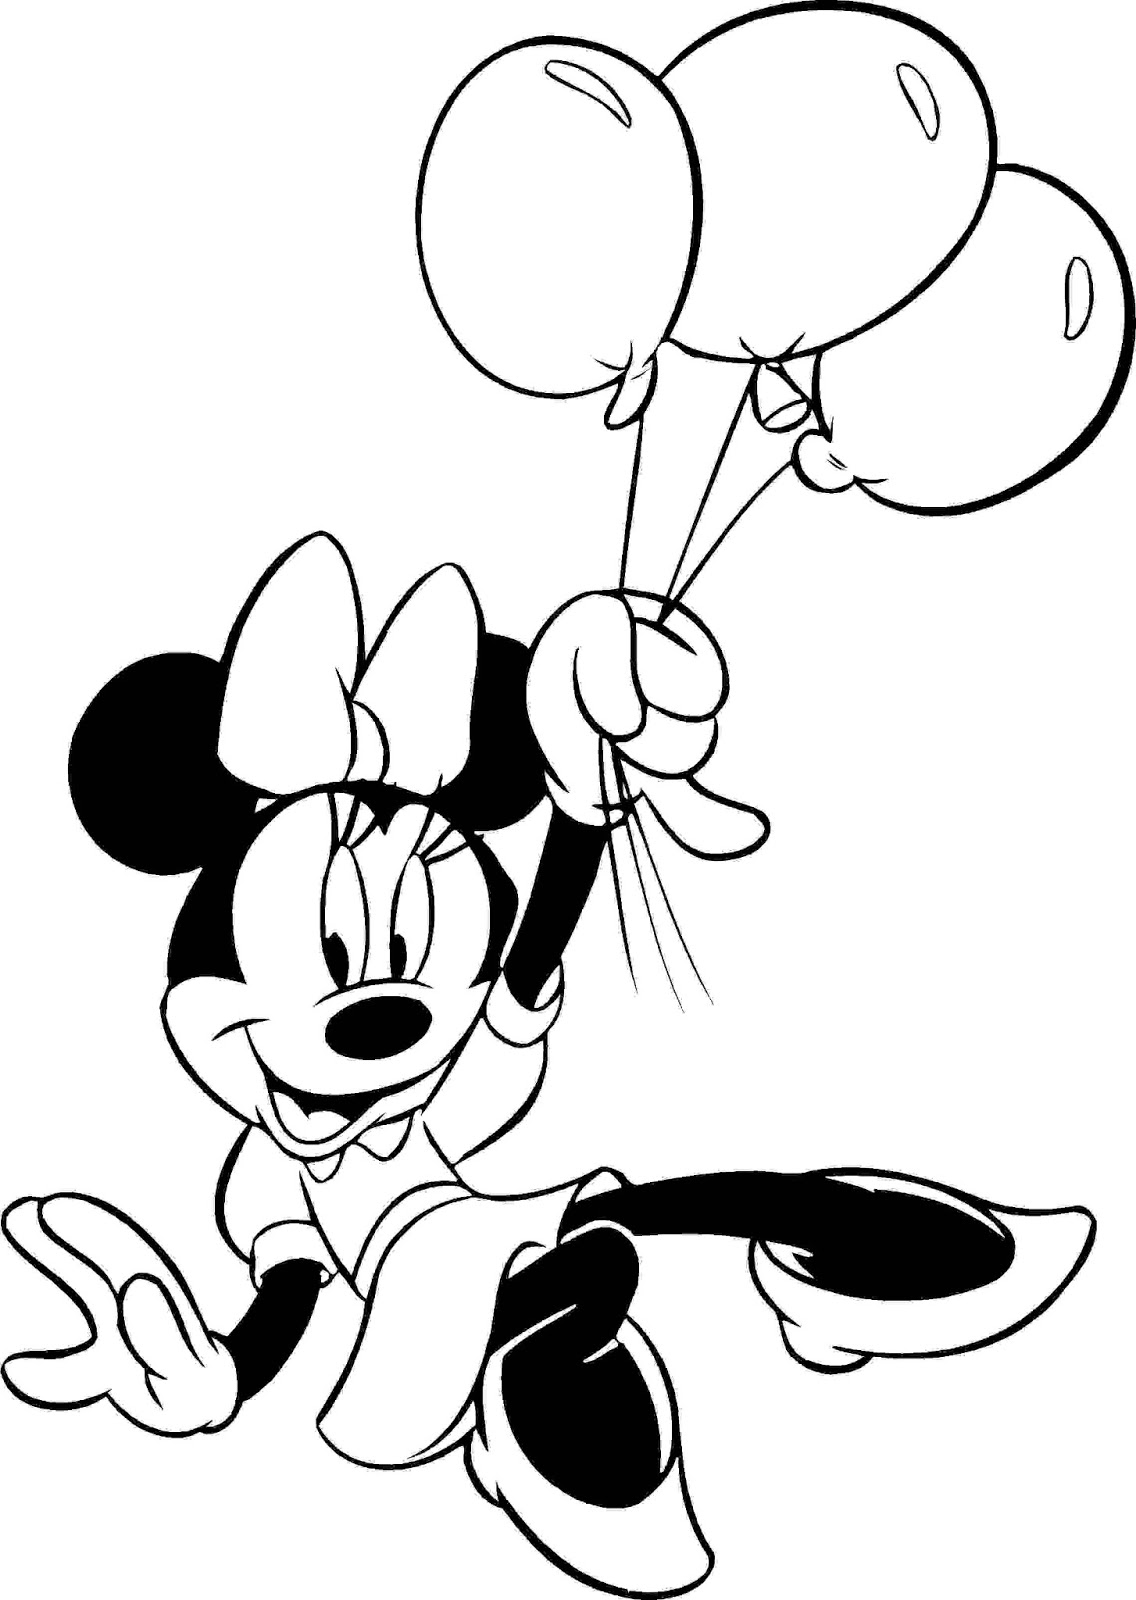 minnie mouse coloring pages free free minnie coloring pages to color coloring pages free minnie mouse coloring pages 